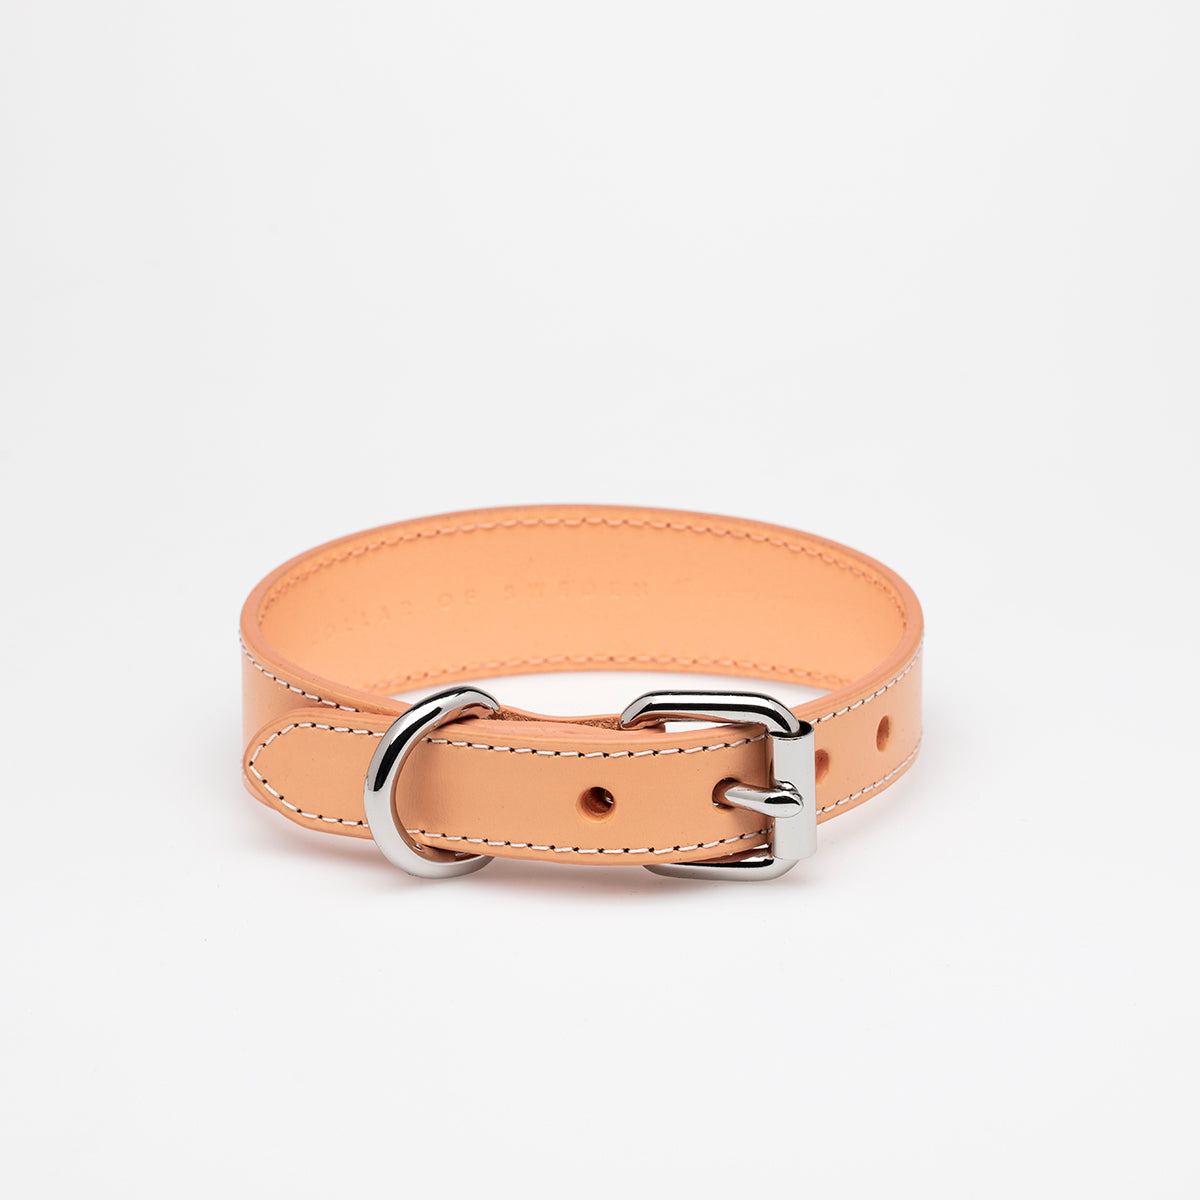 image - Apricot Leather Collar Large Thin